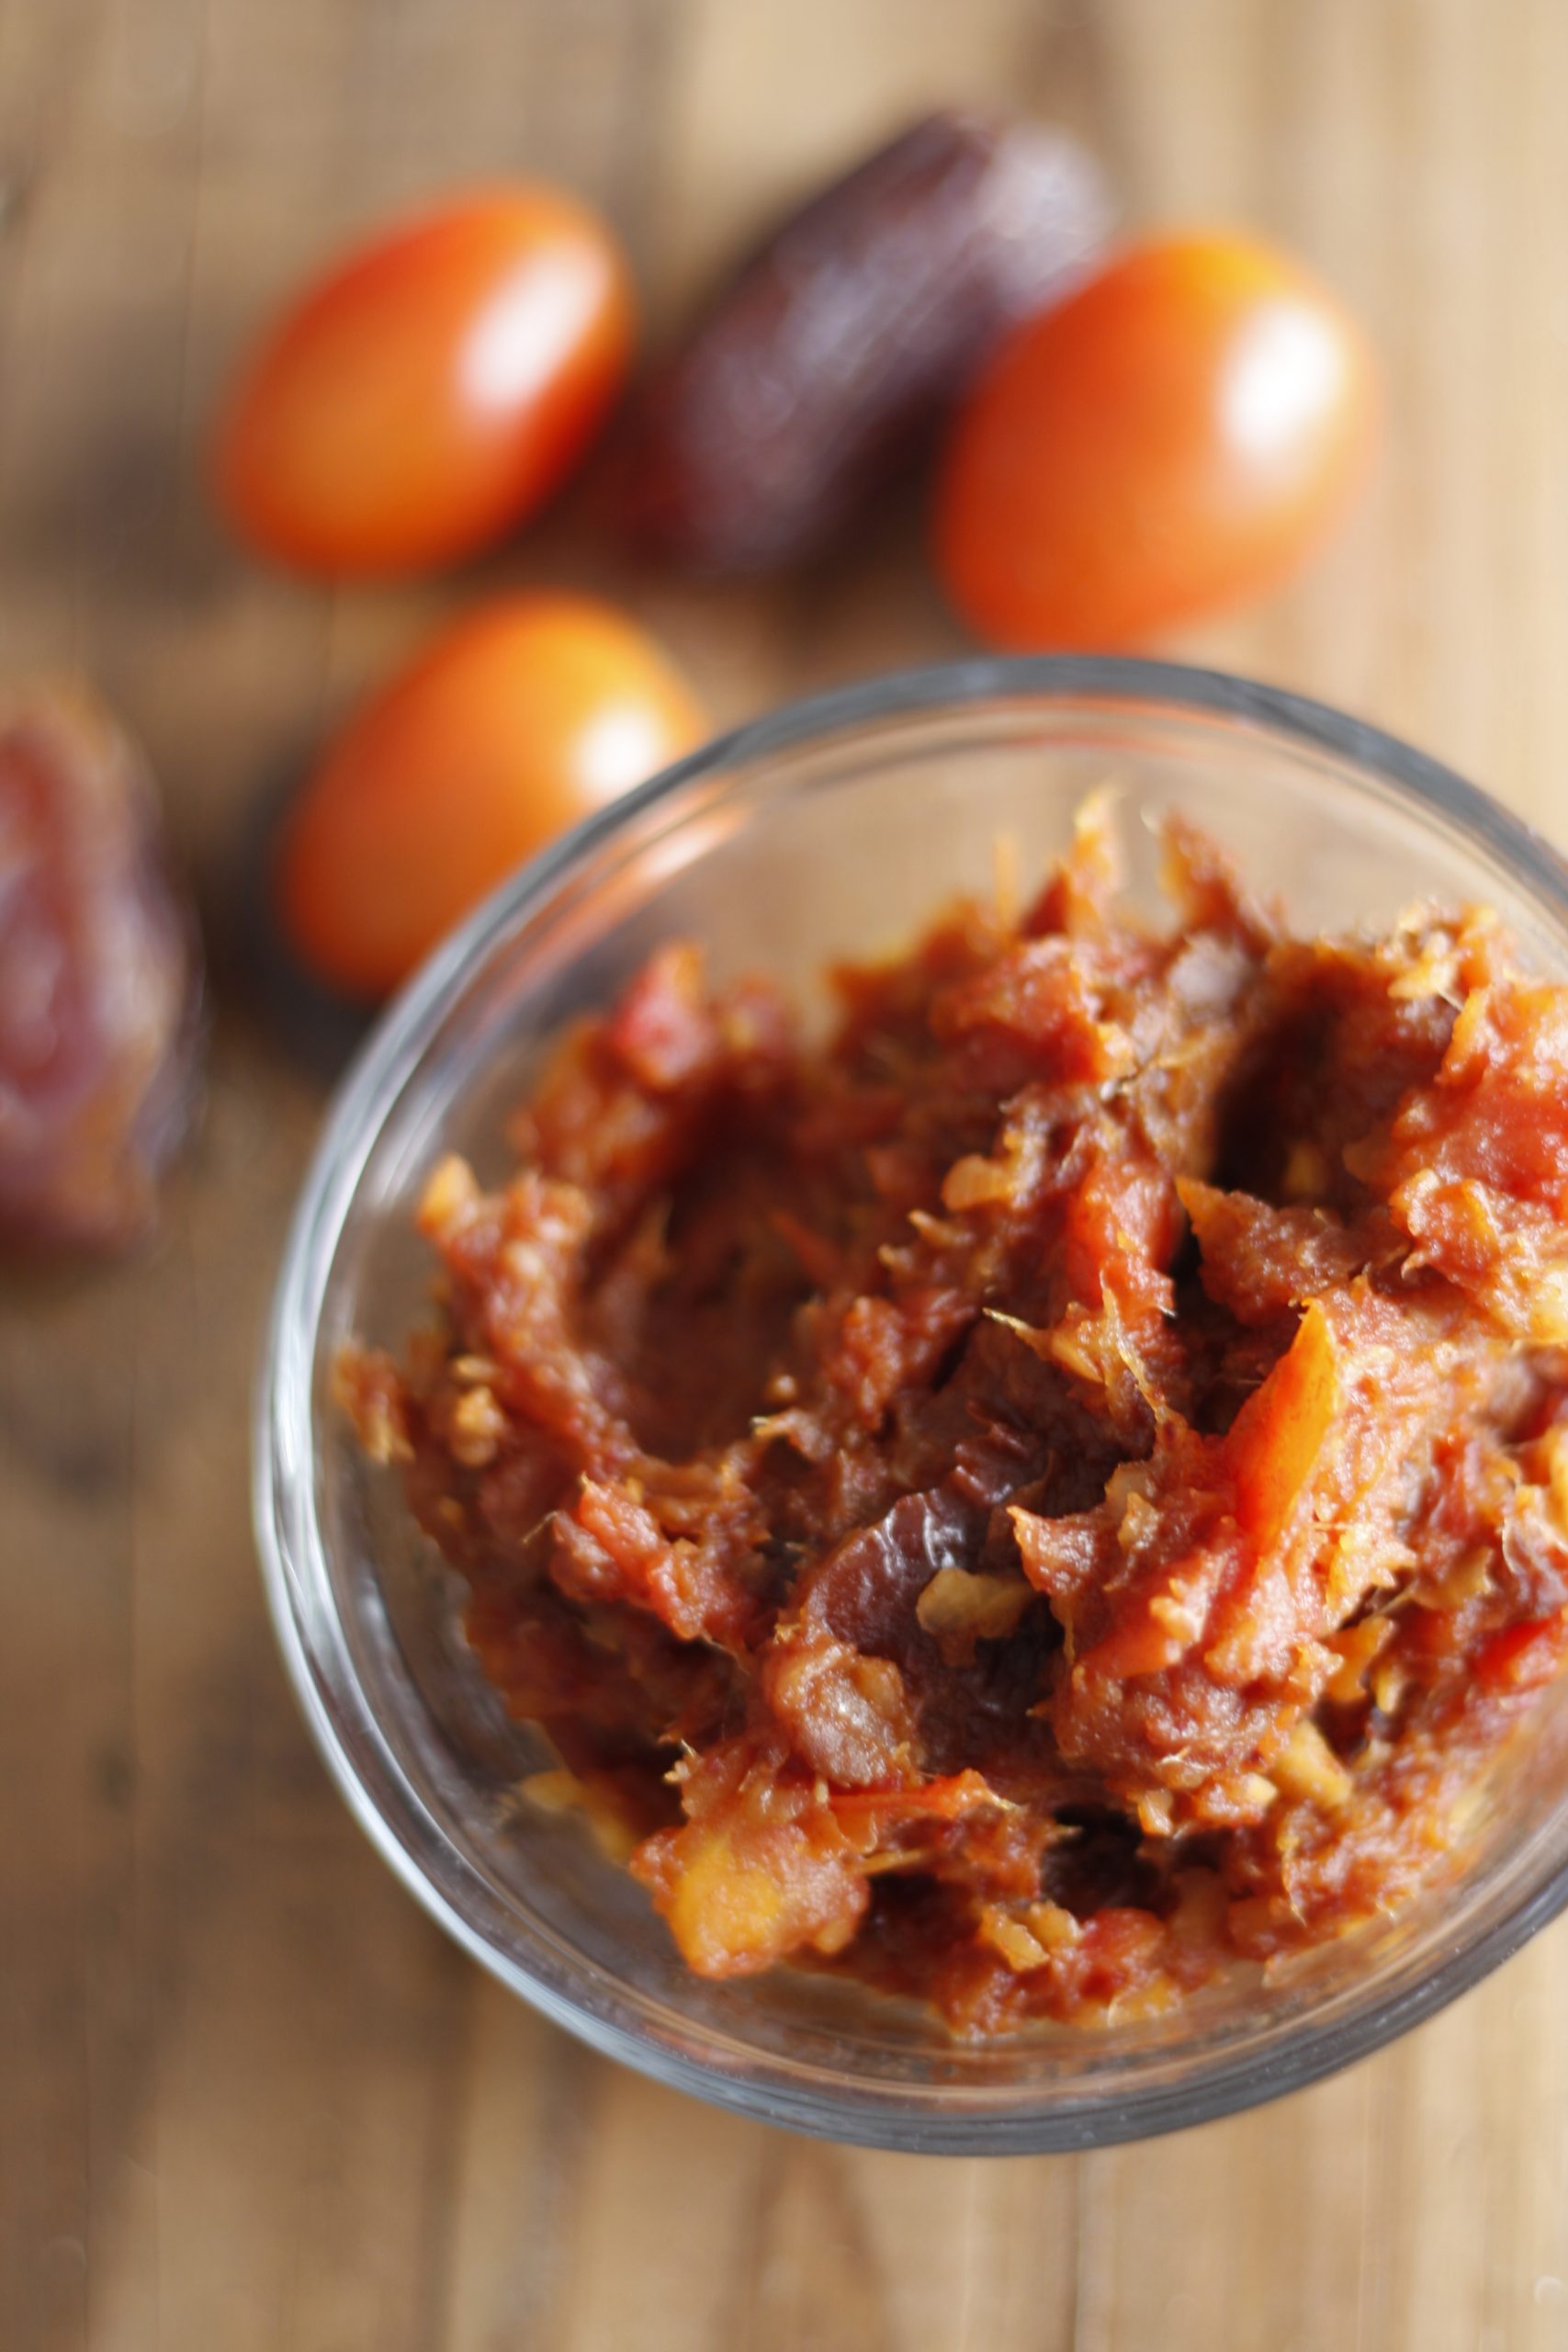 Tomato and date chutney in a glass bowl with tomatoes and dates in the background